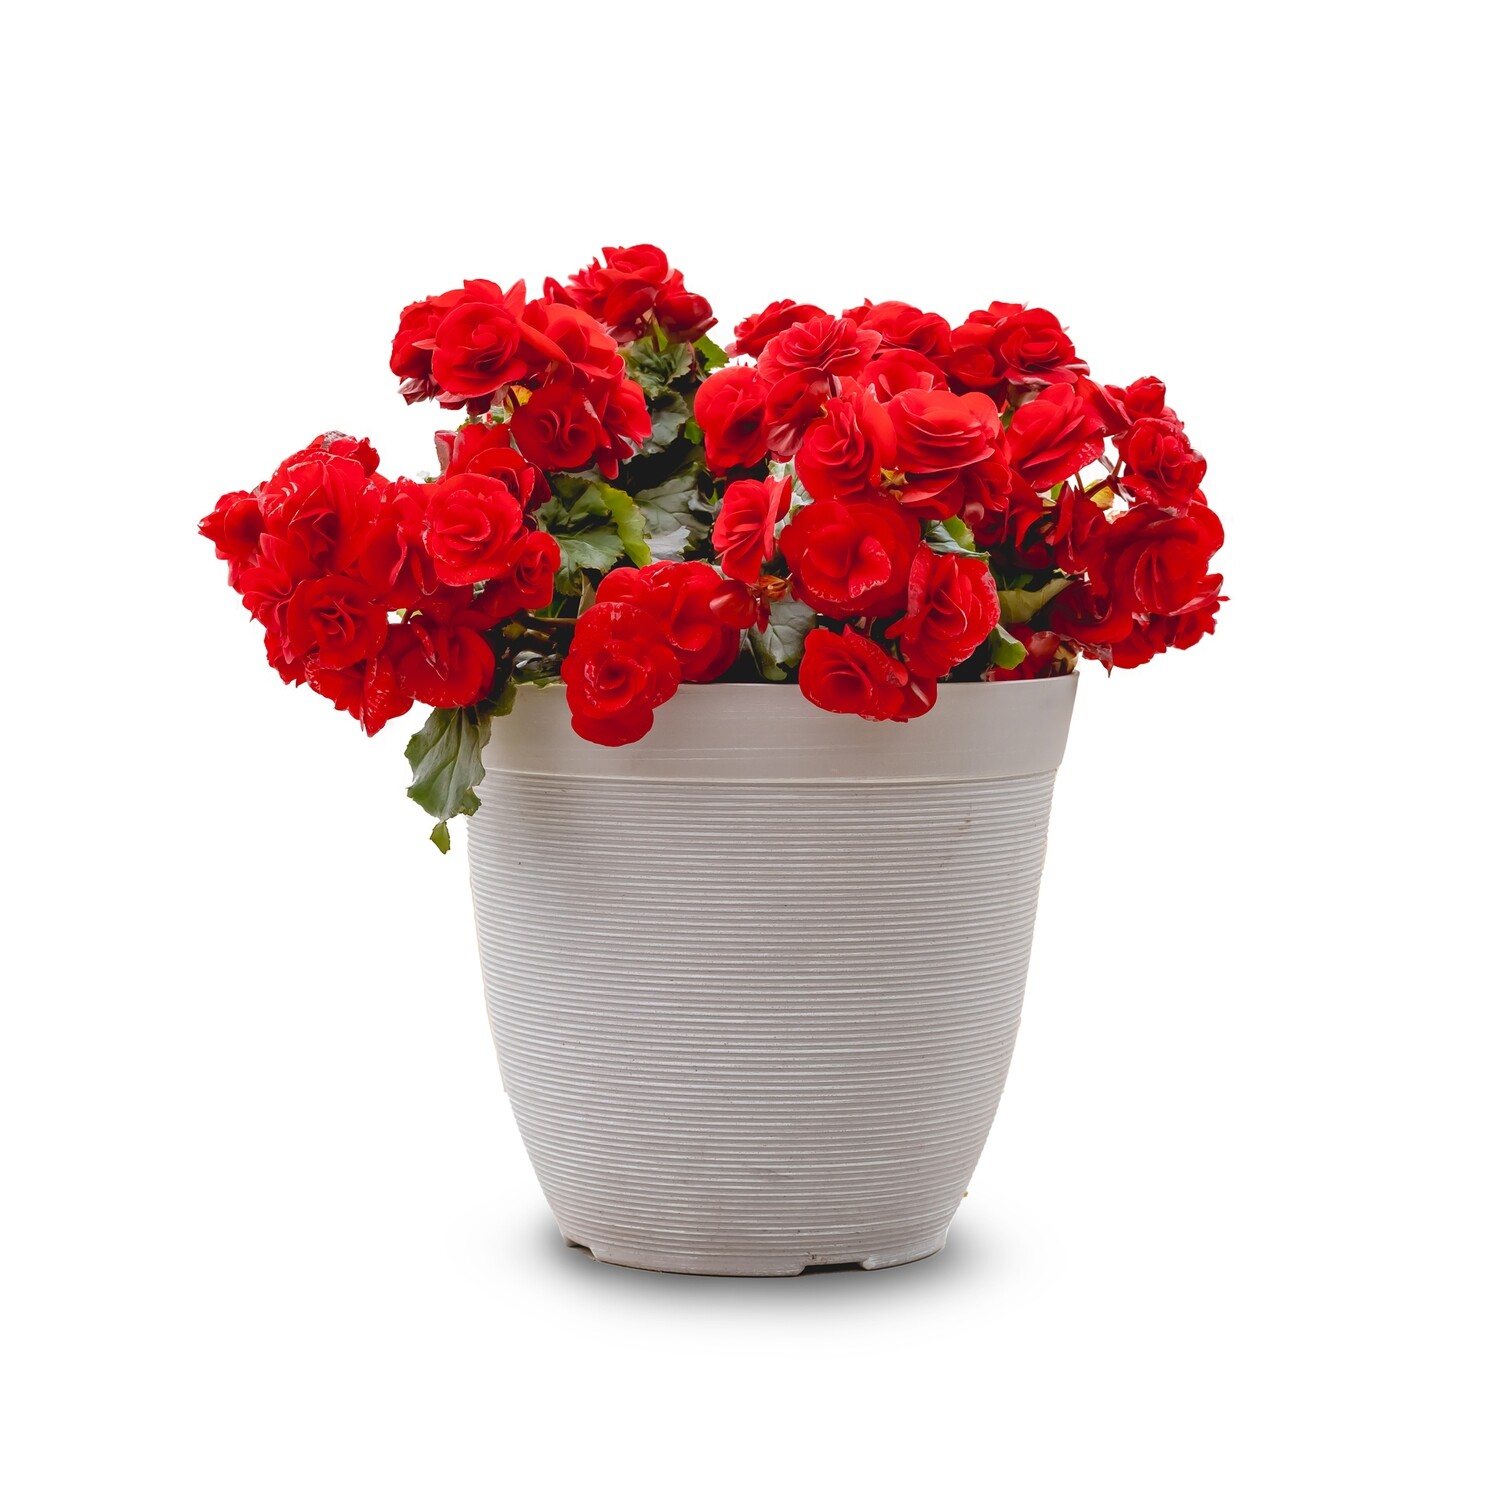 Begonia 'Rieger' 12" Planter - Red